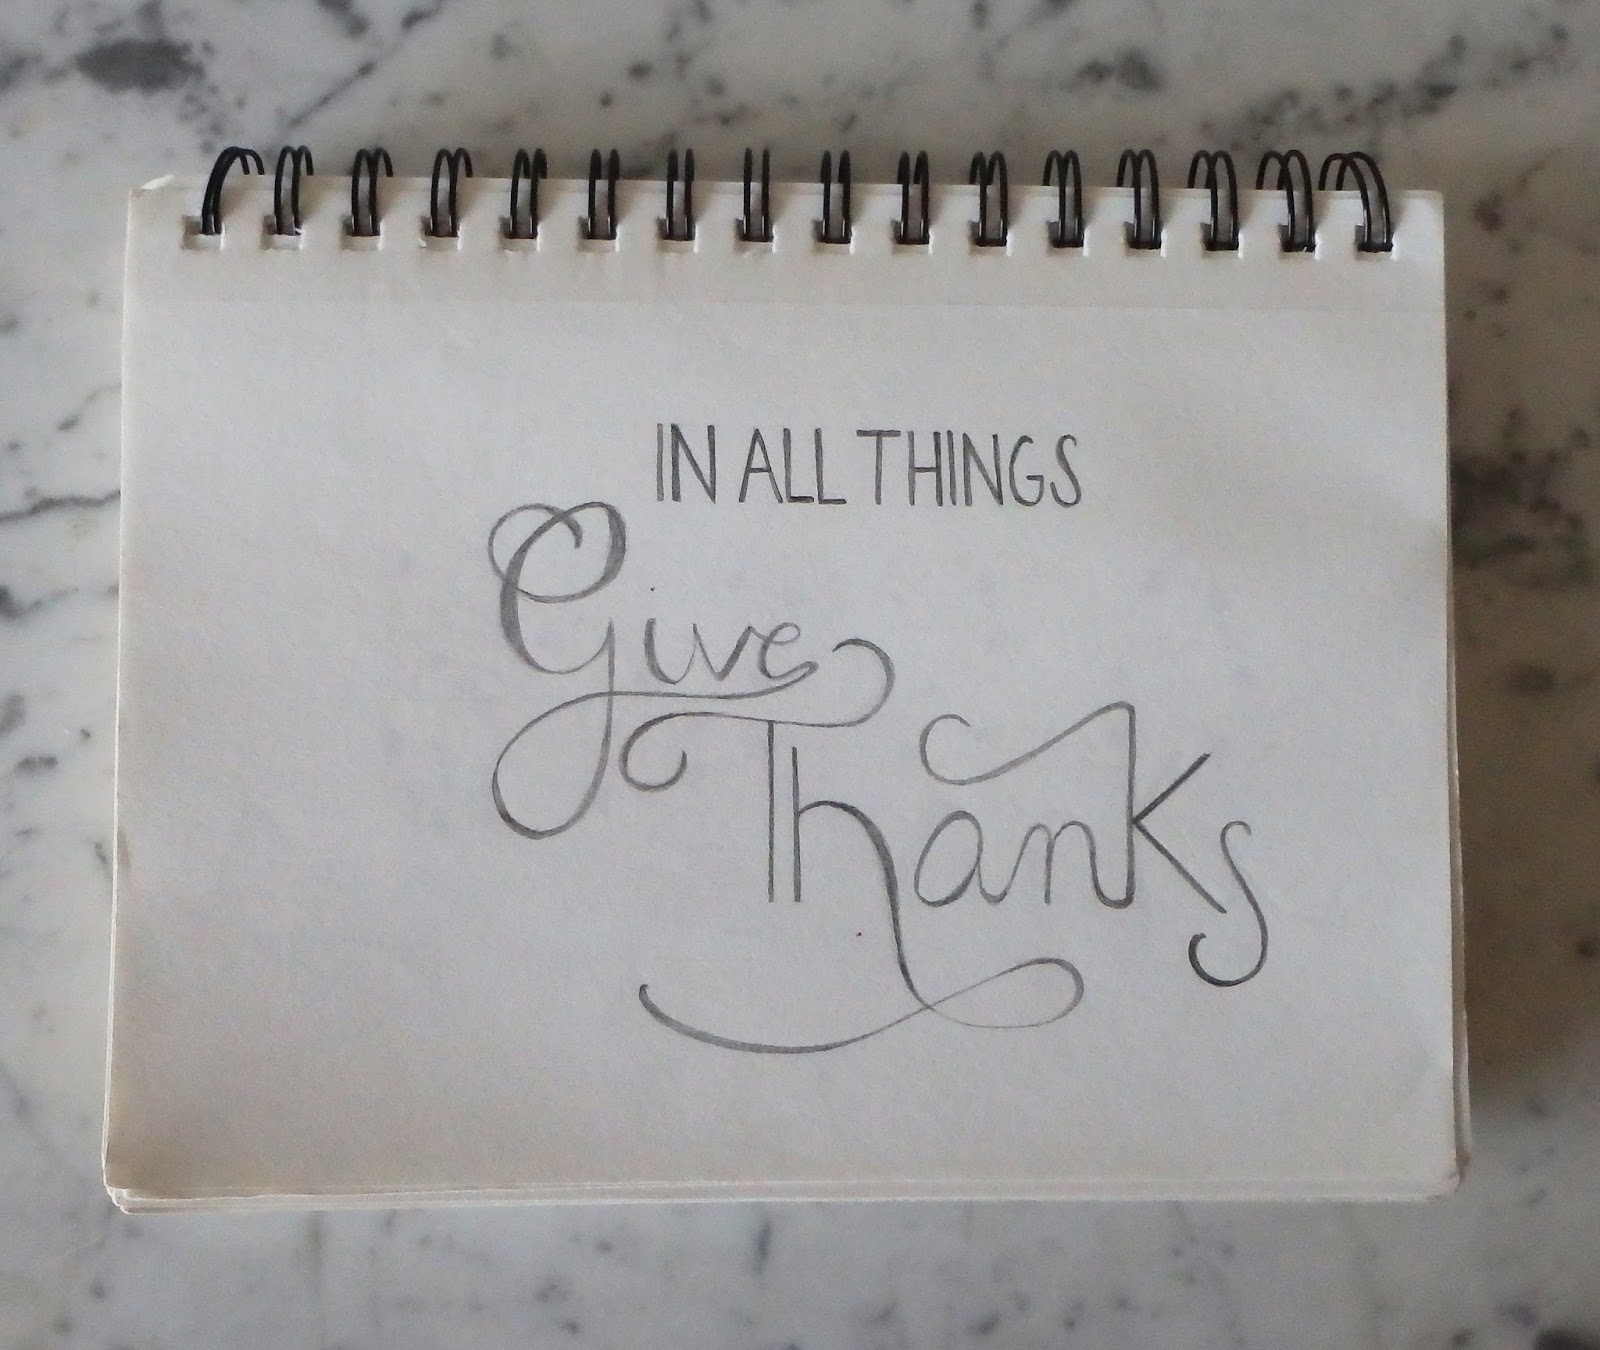 100 days of hand lettering